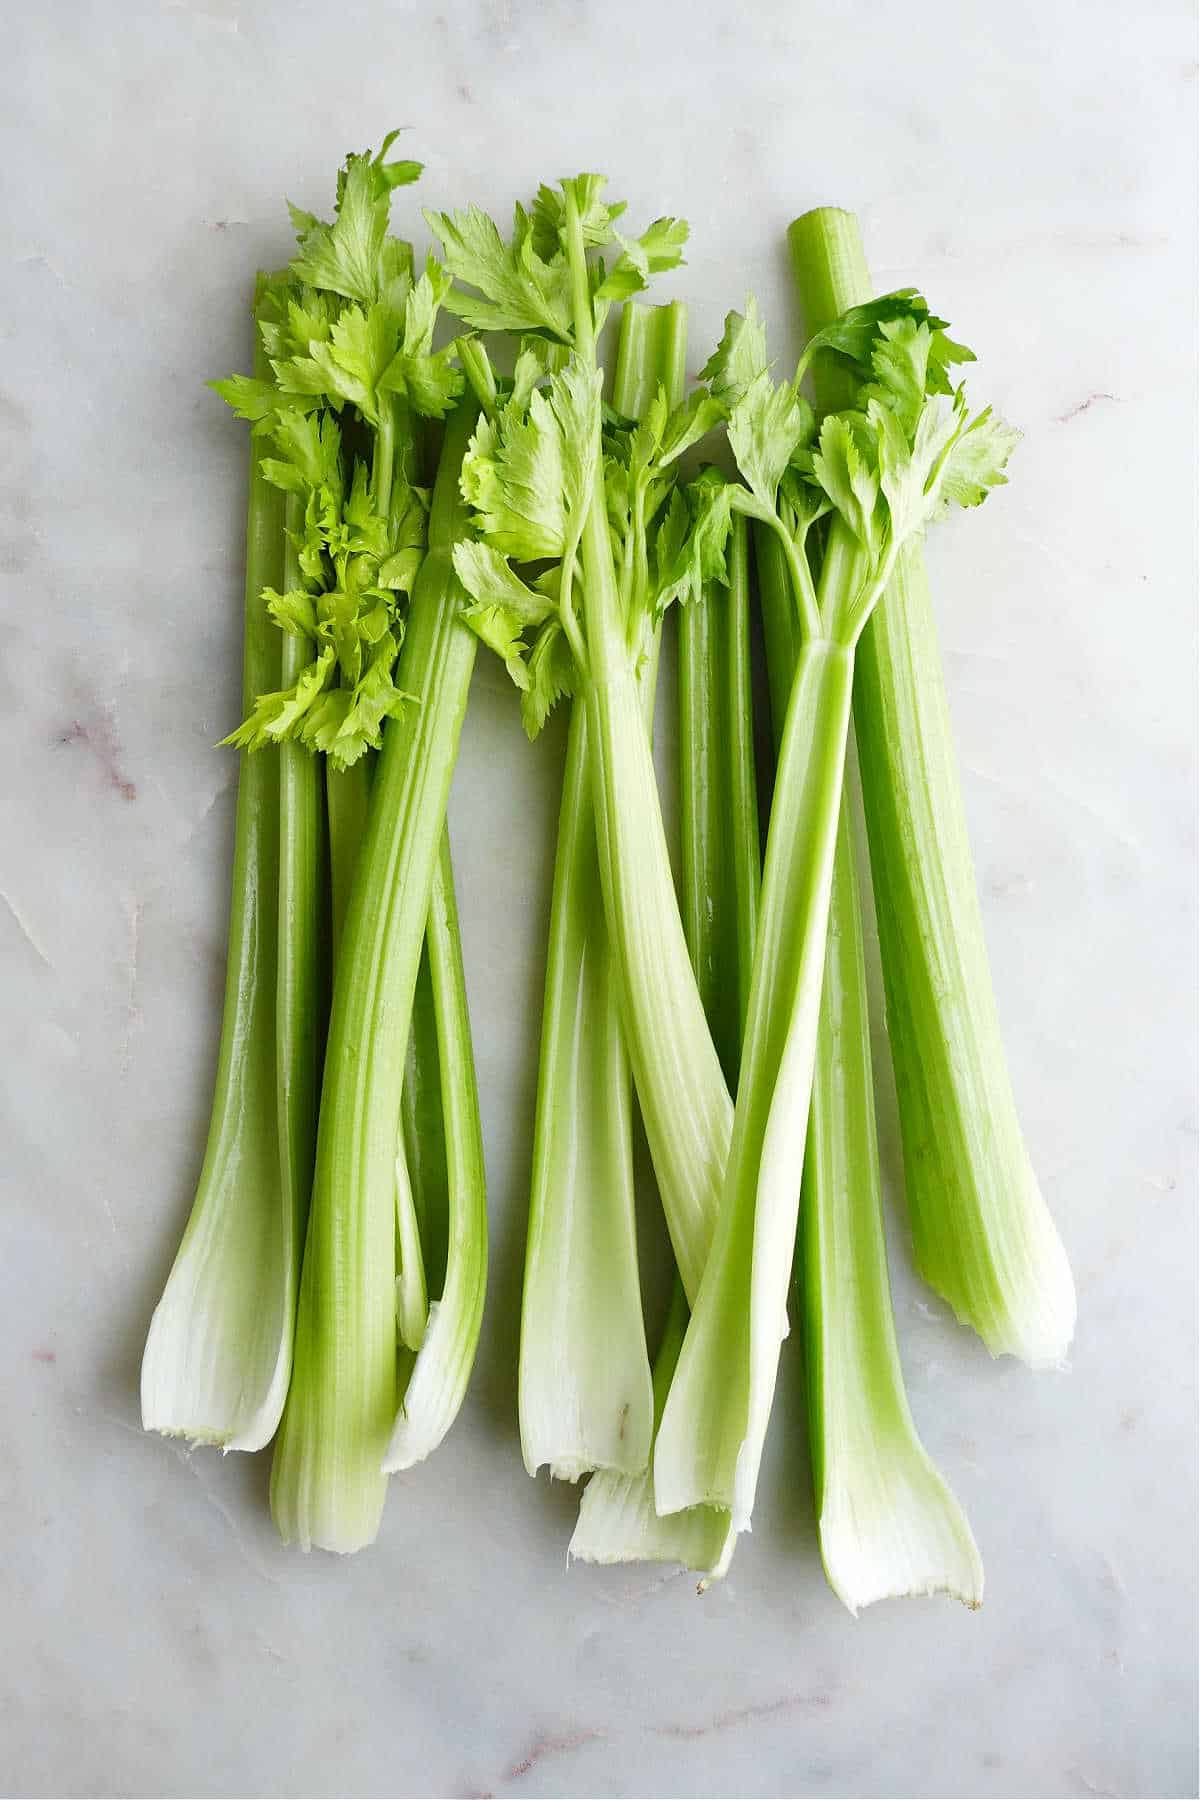 stalks of celery and their leaves spread out next to each other on a counter